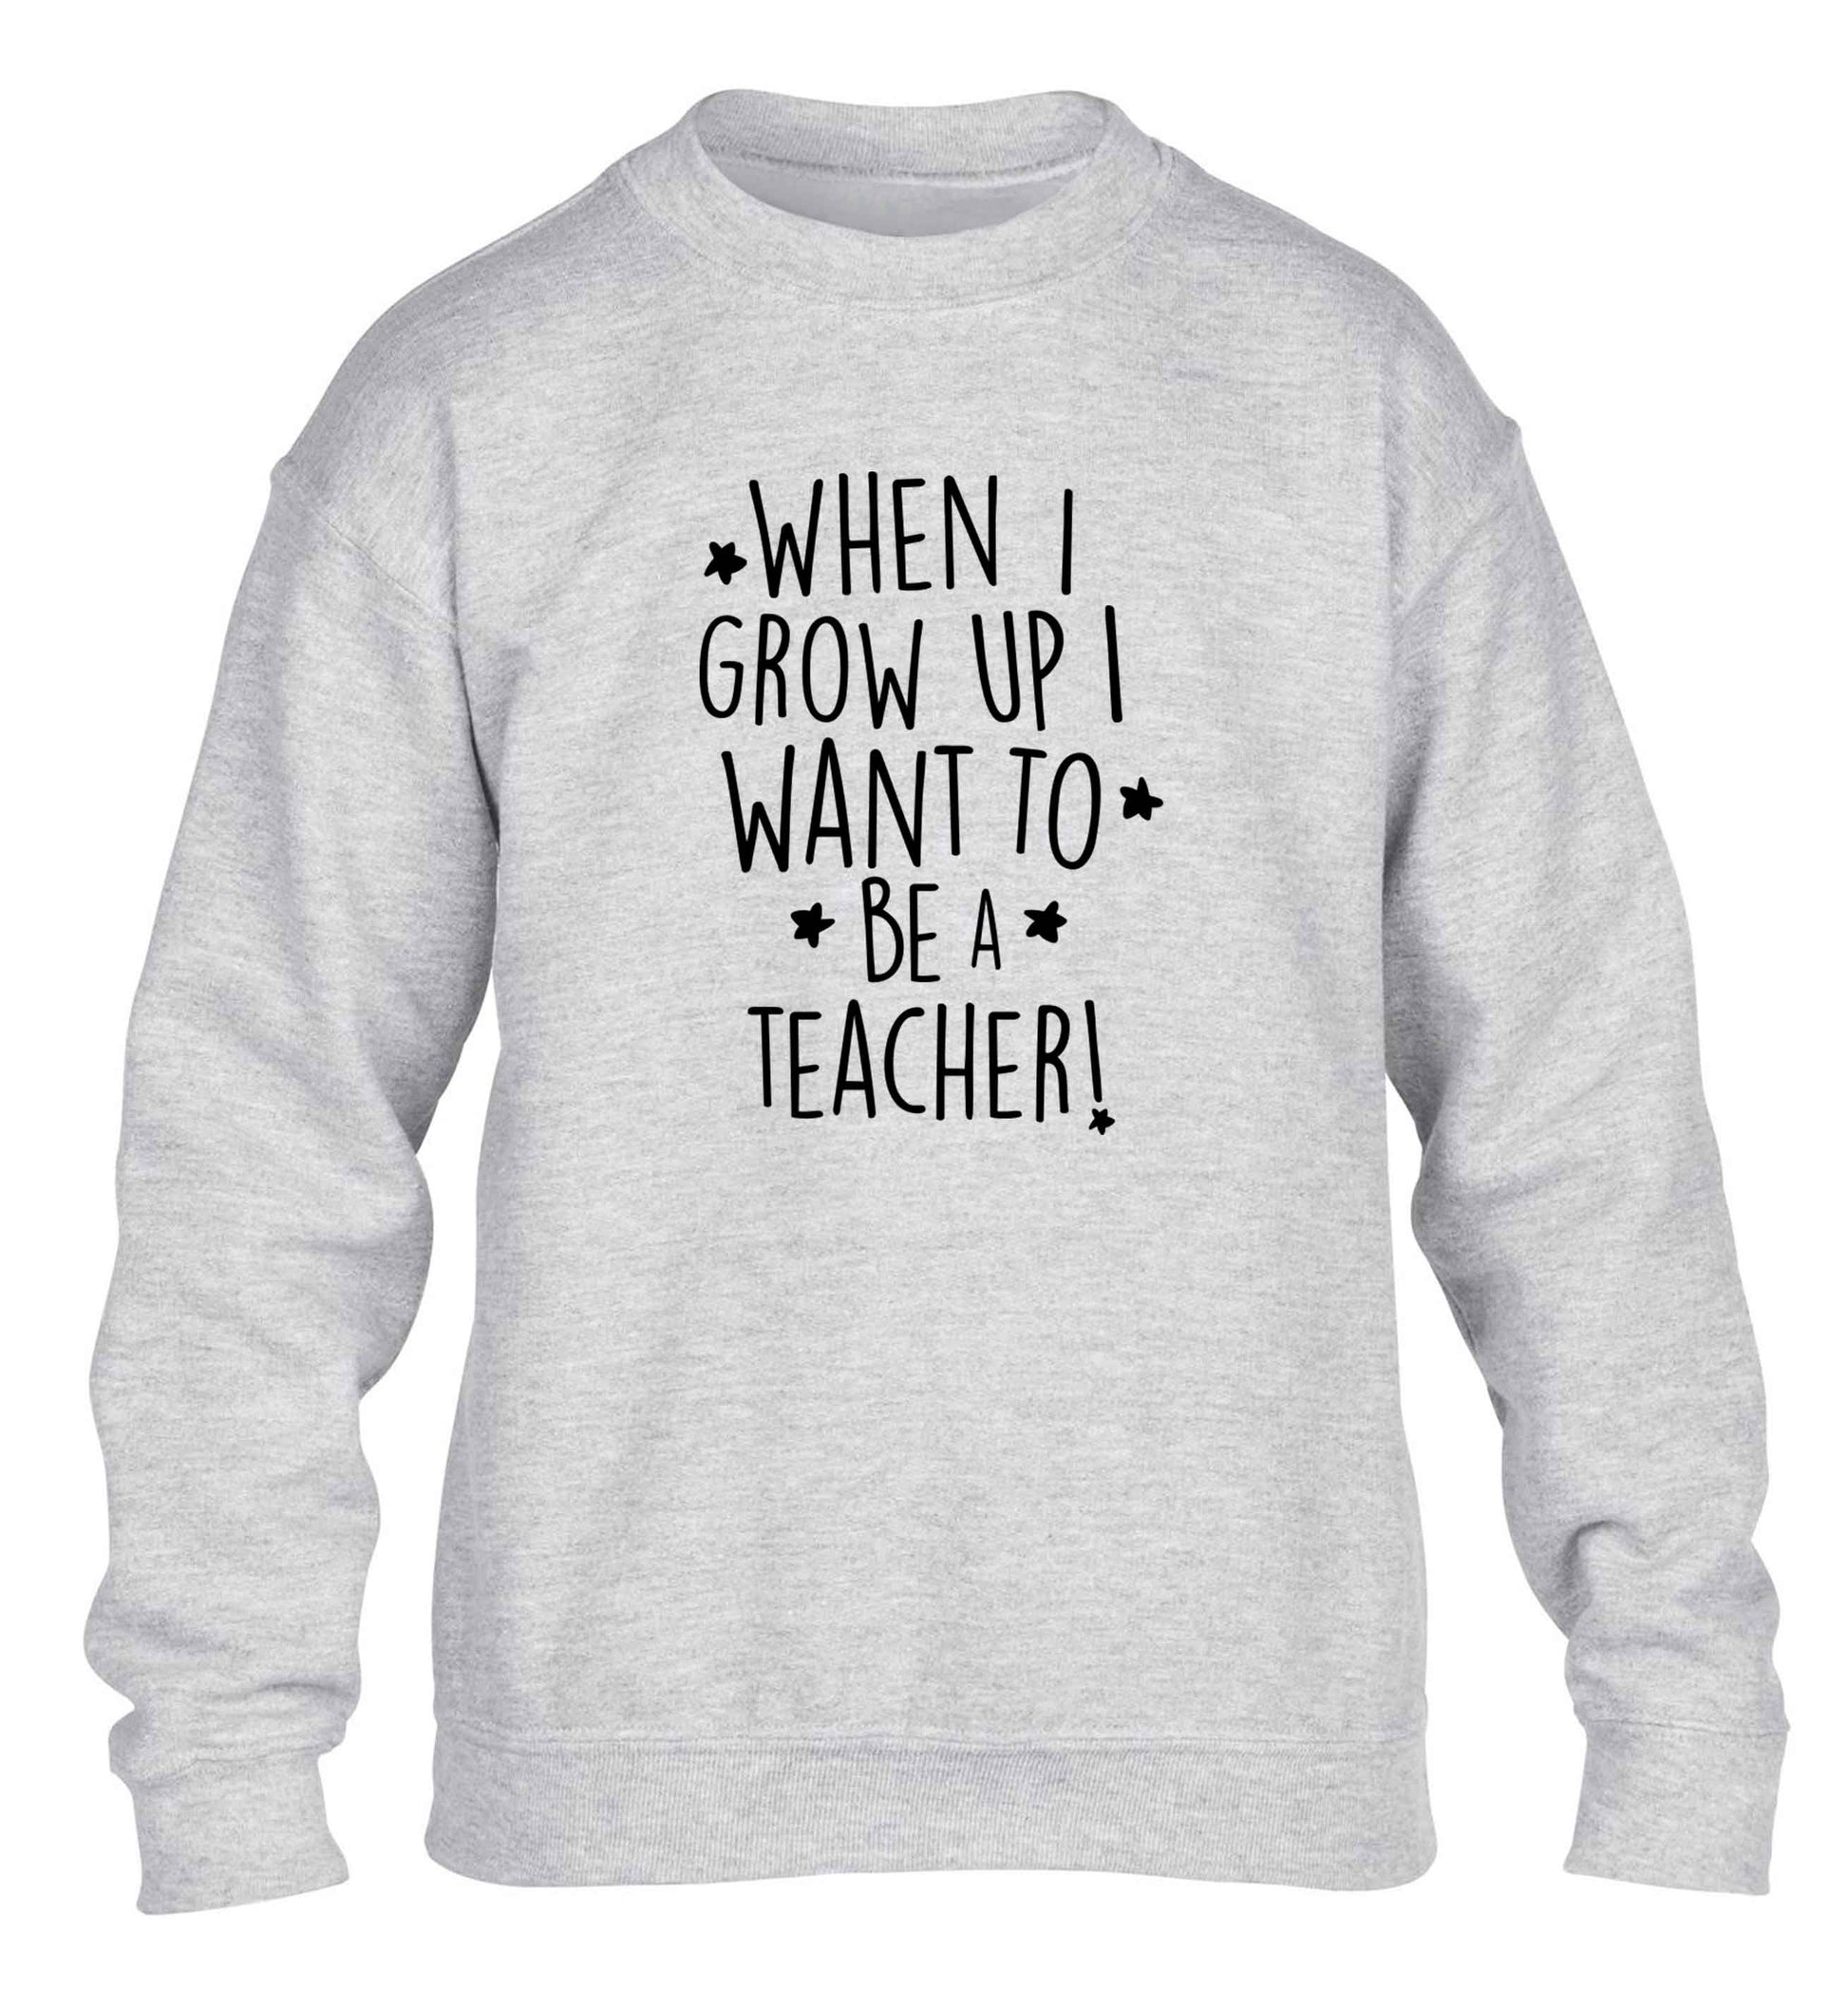 When I grow up I want to be a teacher children's grey sweater 12-13 Years